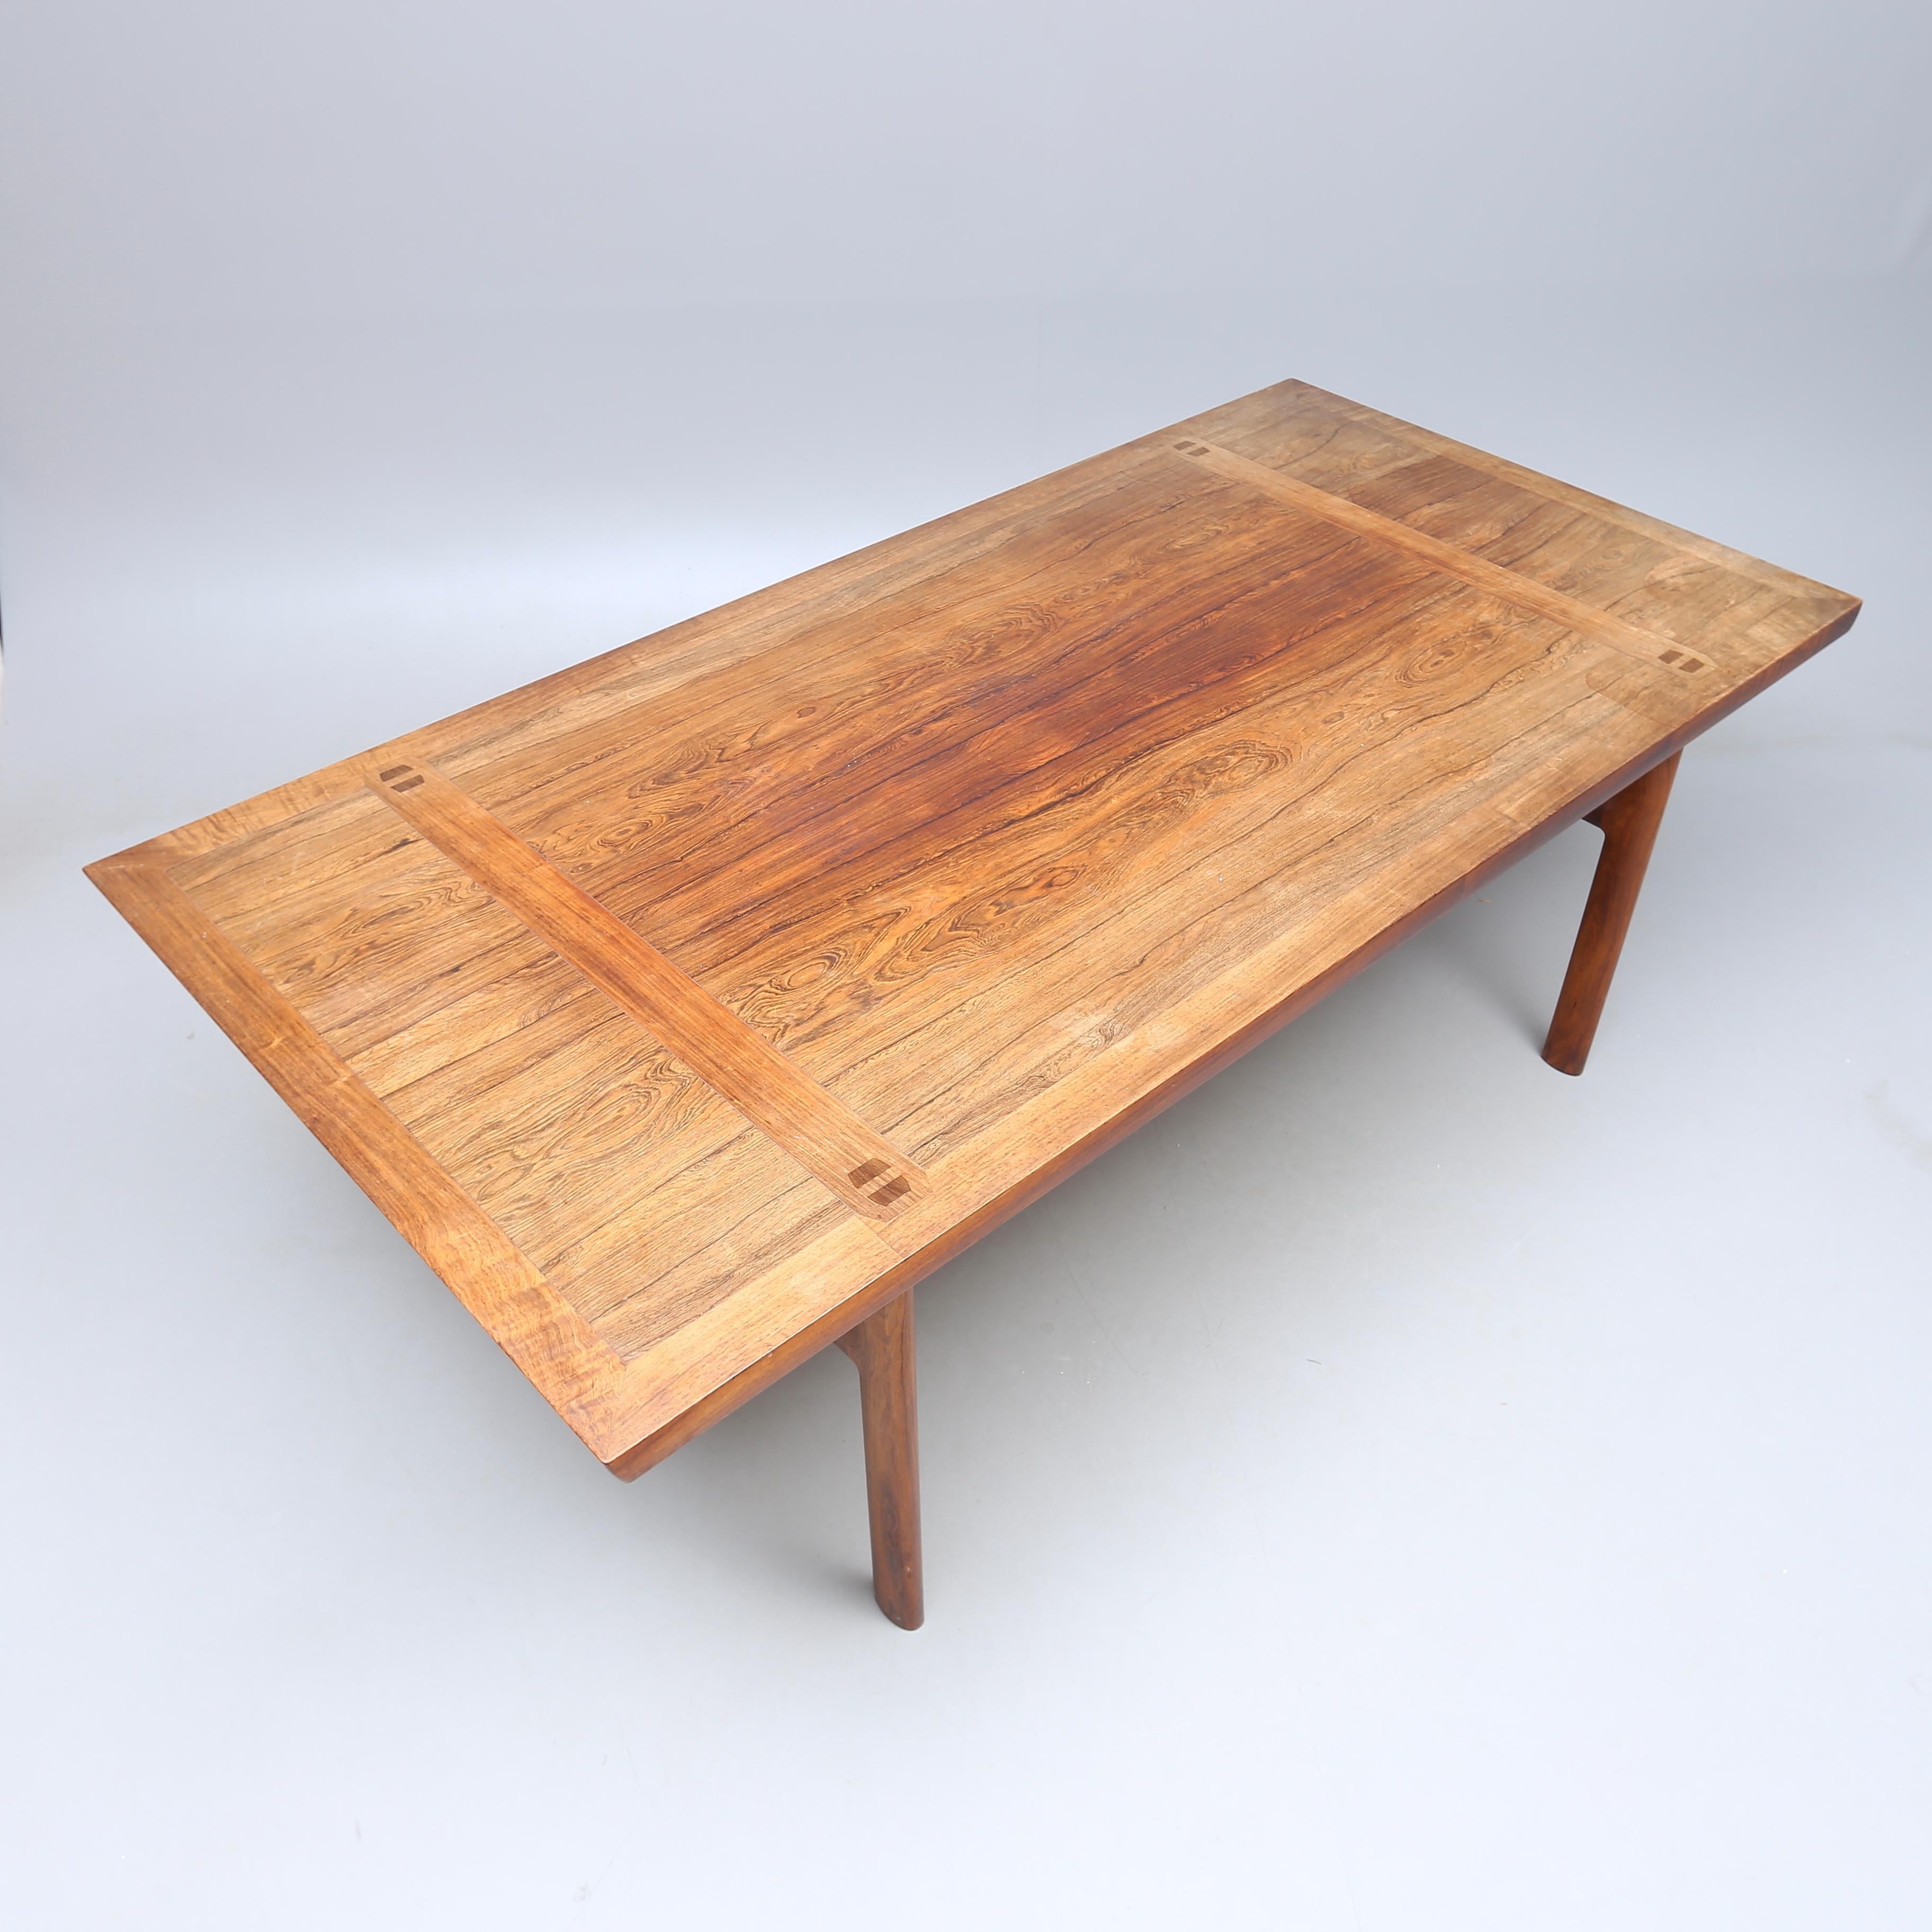 Rare dining table, partly jacaranda, probably for Ludvig Pontoppidan, Denmark, unmarked, 1950s / 1960s. Reportedly purchased in Copenhagen 1967/1968. Unknown maker.

